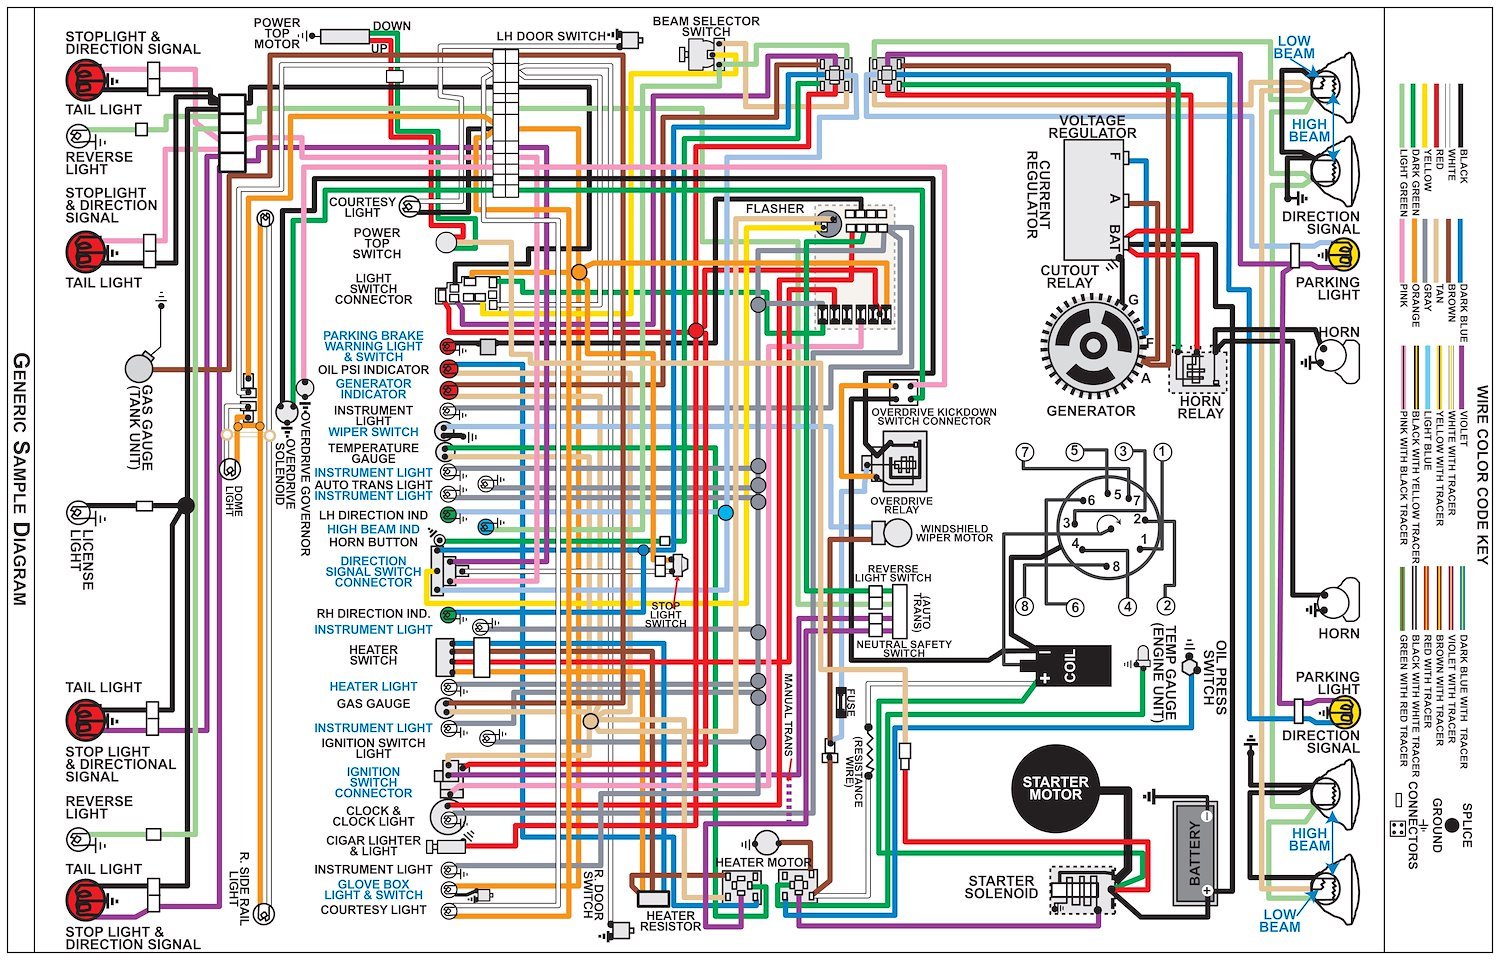 Wiring Diagram for 1976 Ford F-Series Truck, 11 in x 17 in., Laminated